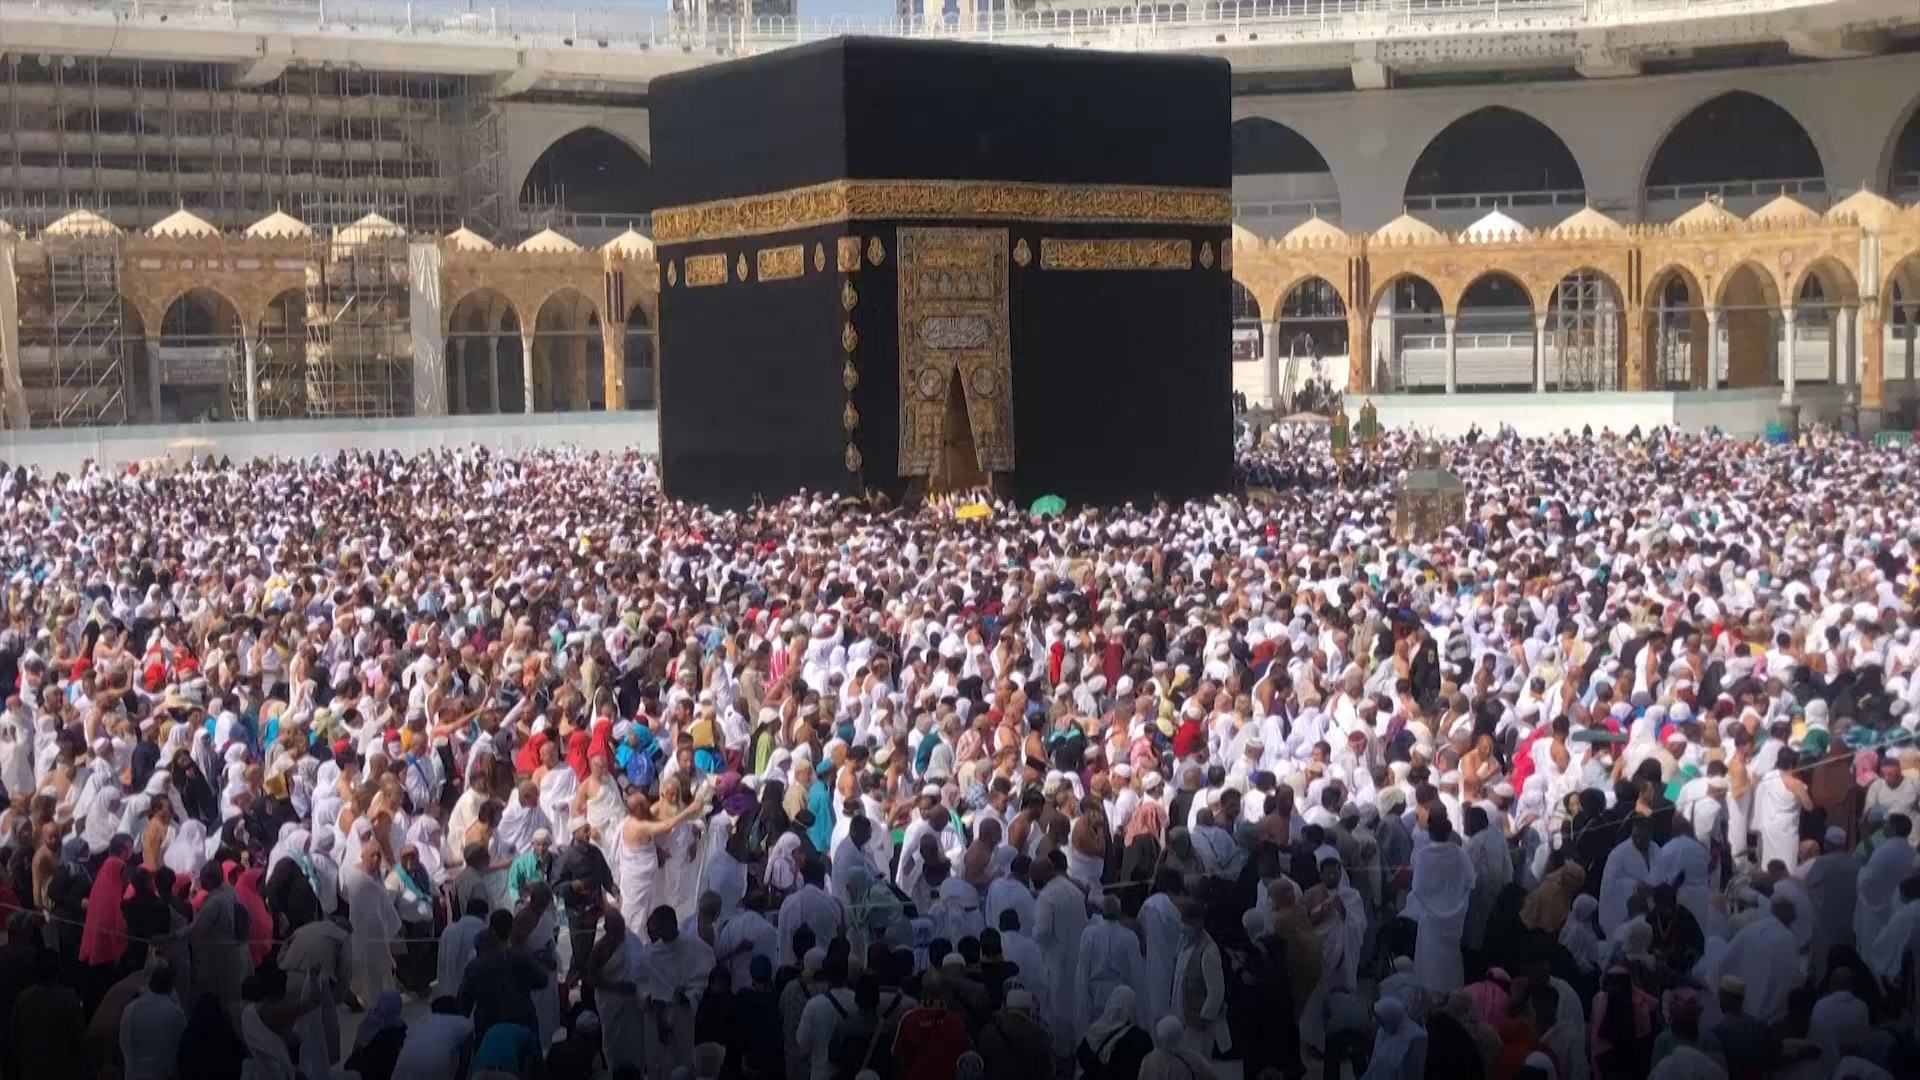 Saudi Arabia bars foreigners from visiting Mecca as coronavirus epidemic takes hold in nearby Iran